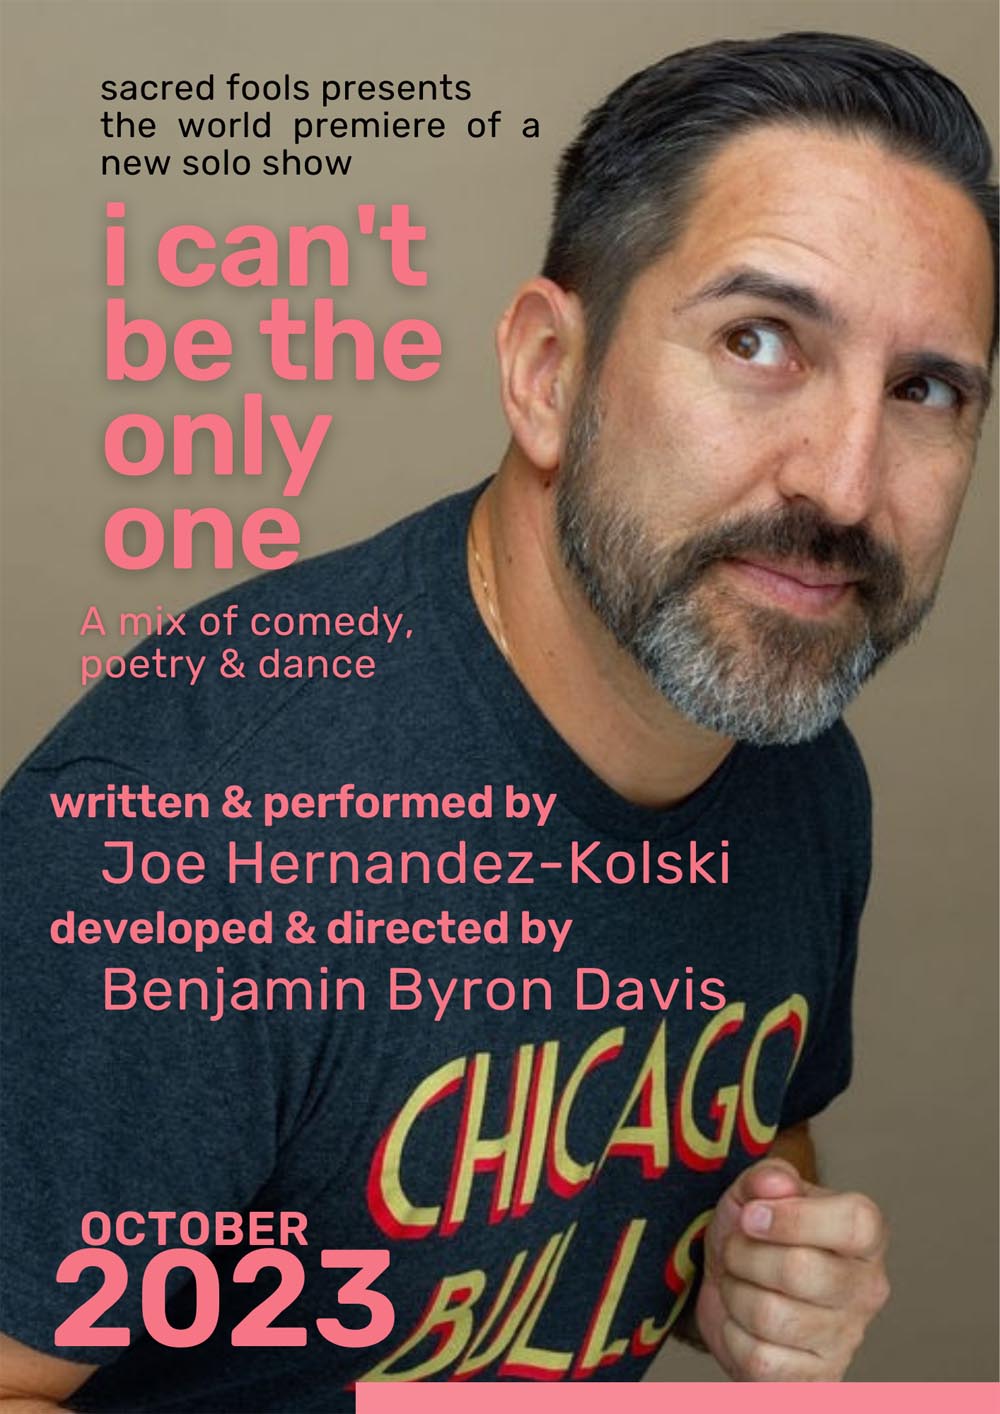 "I Can't Be the Only One," a mix of comedy, poetry & dance